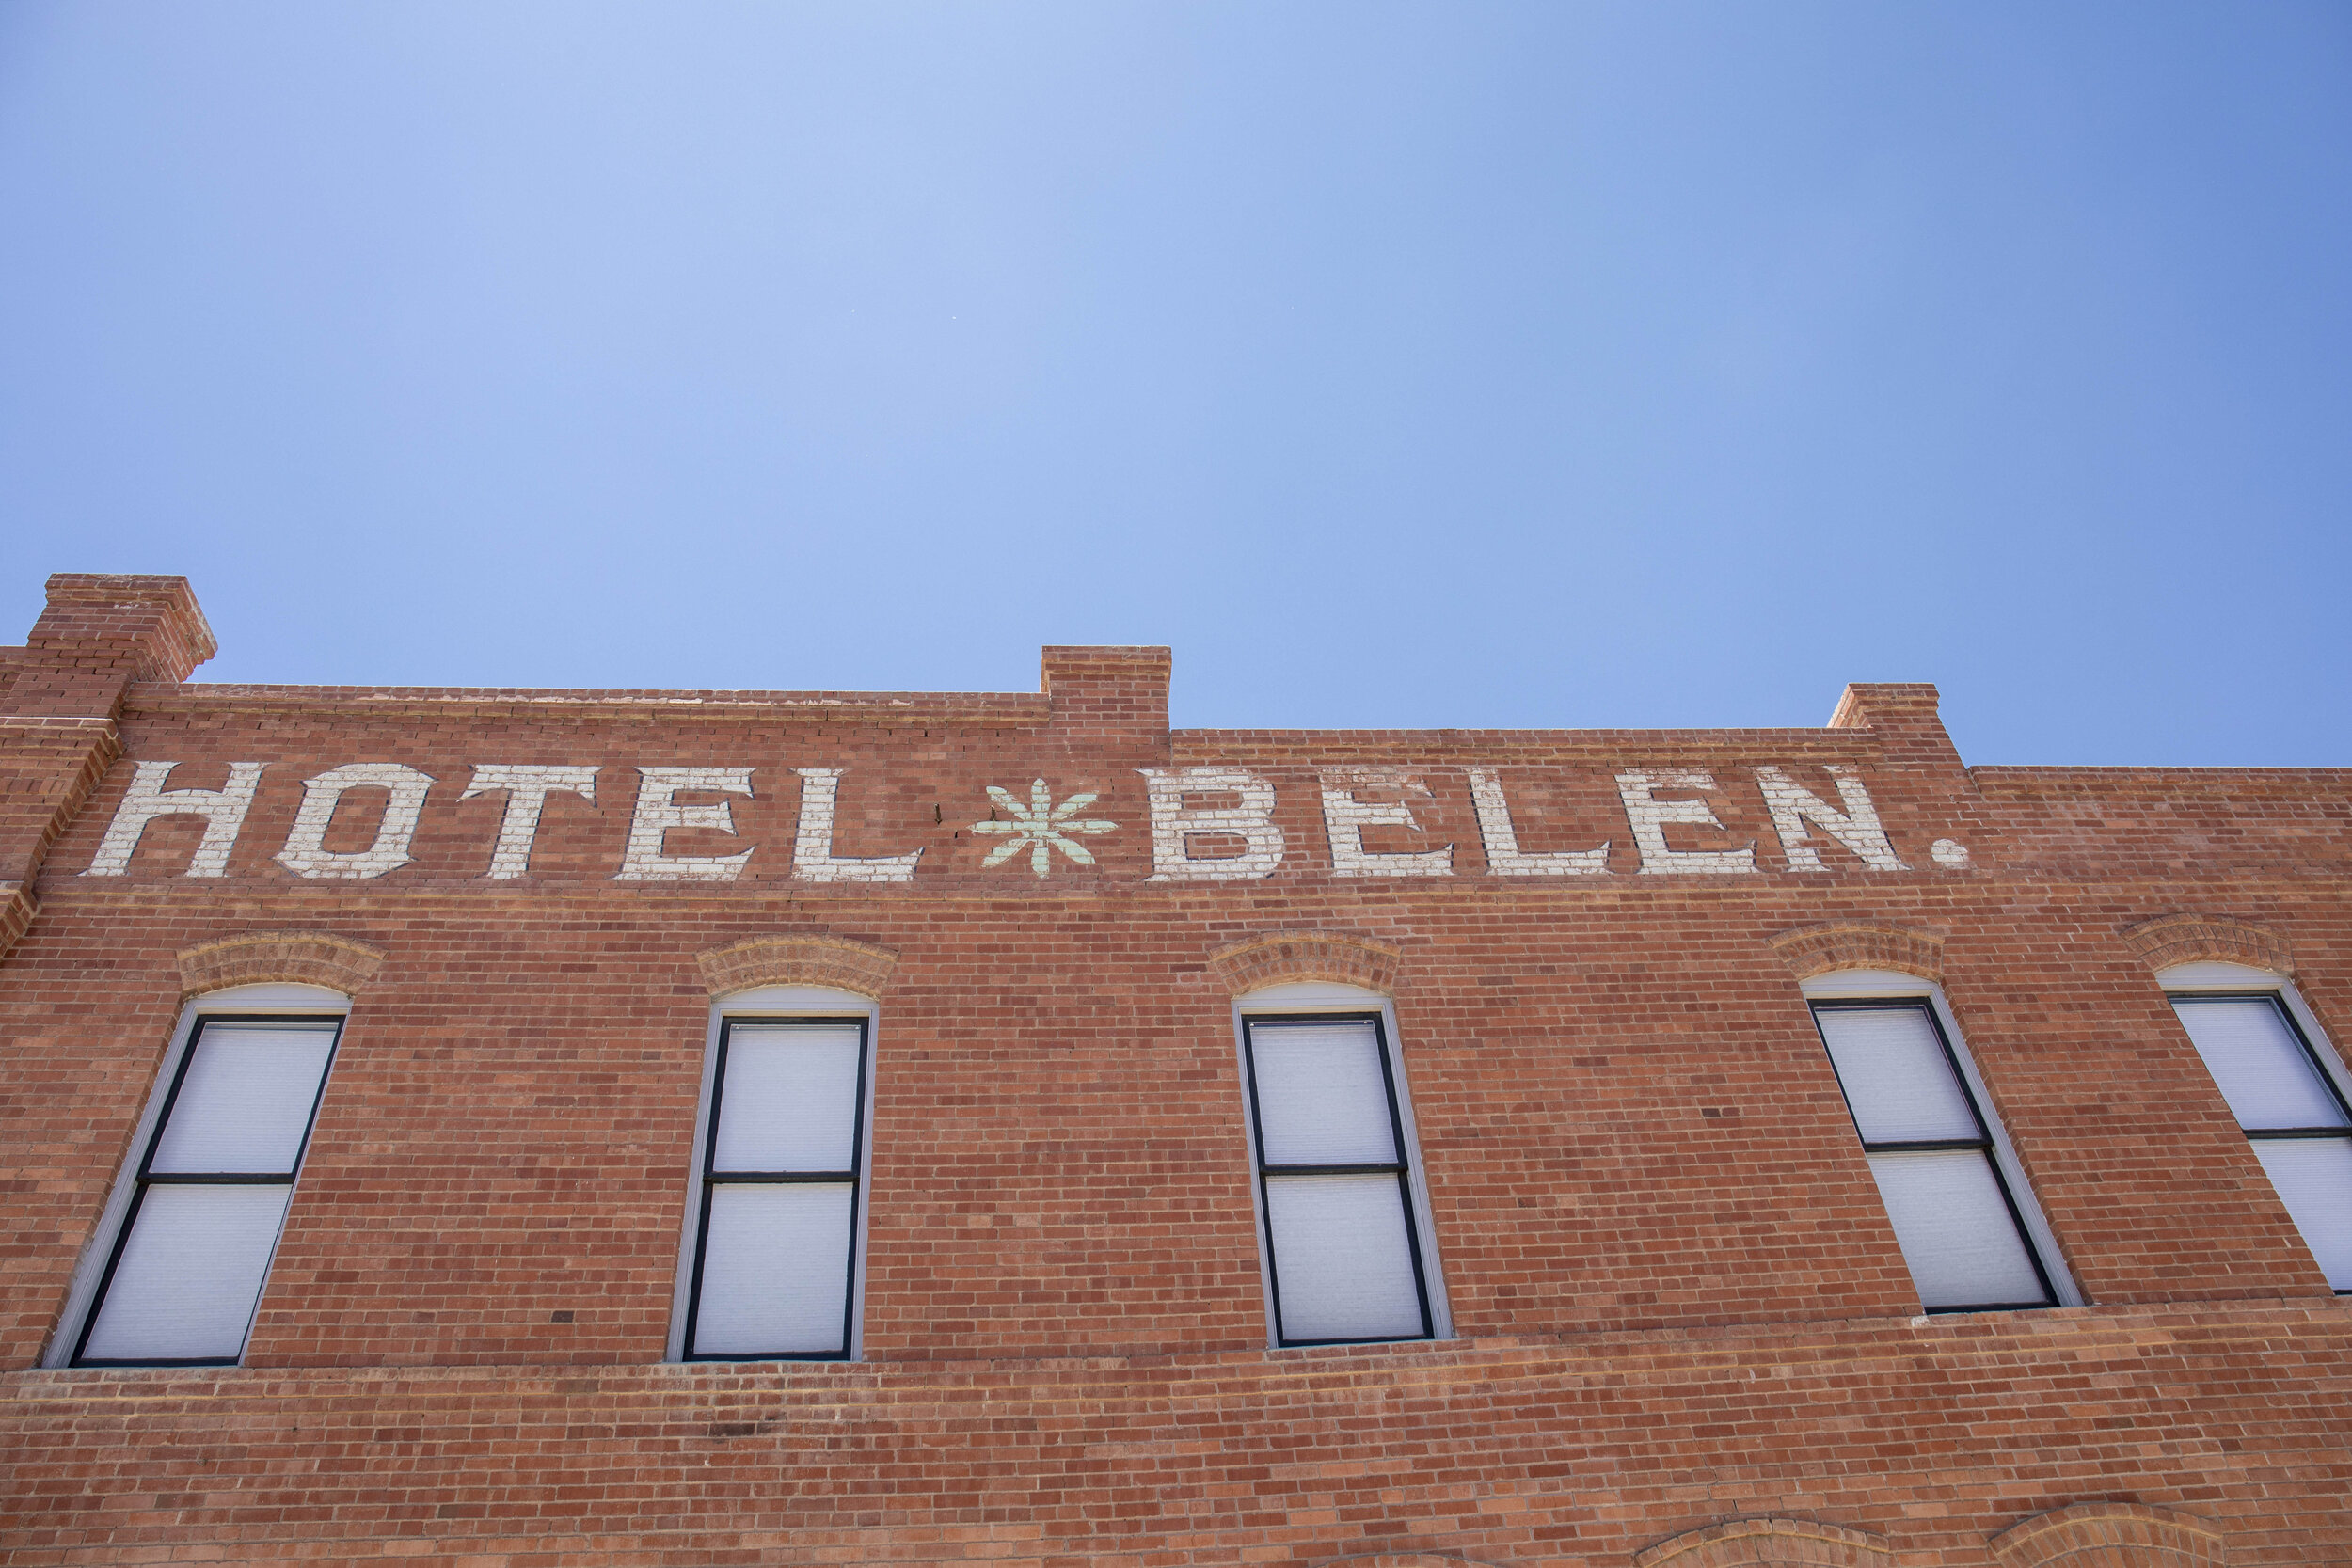  Hotel Belen on Becker Avenue is the headquarters for Through the Flower Art Space and also serves as a home and studio to artists Judy Chicago and Donald Woodman. Chicago and Woodman moved to Belen in 1996 and renovated the hotel for those purposes.